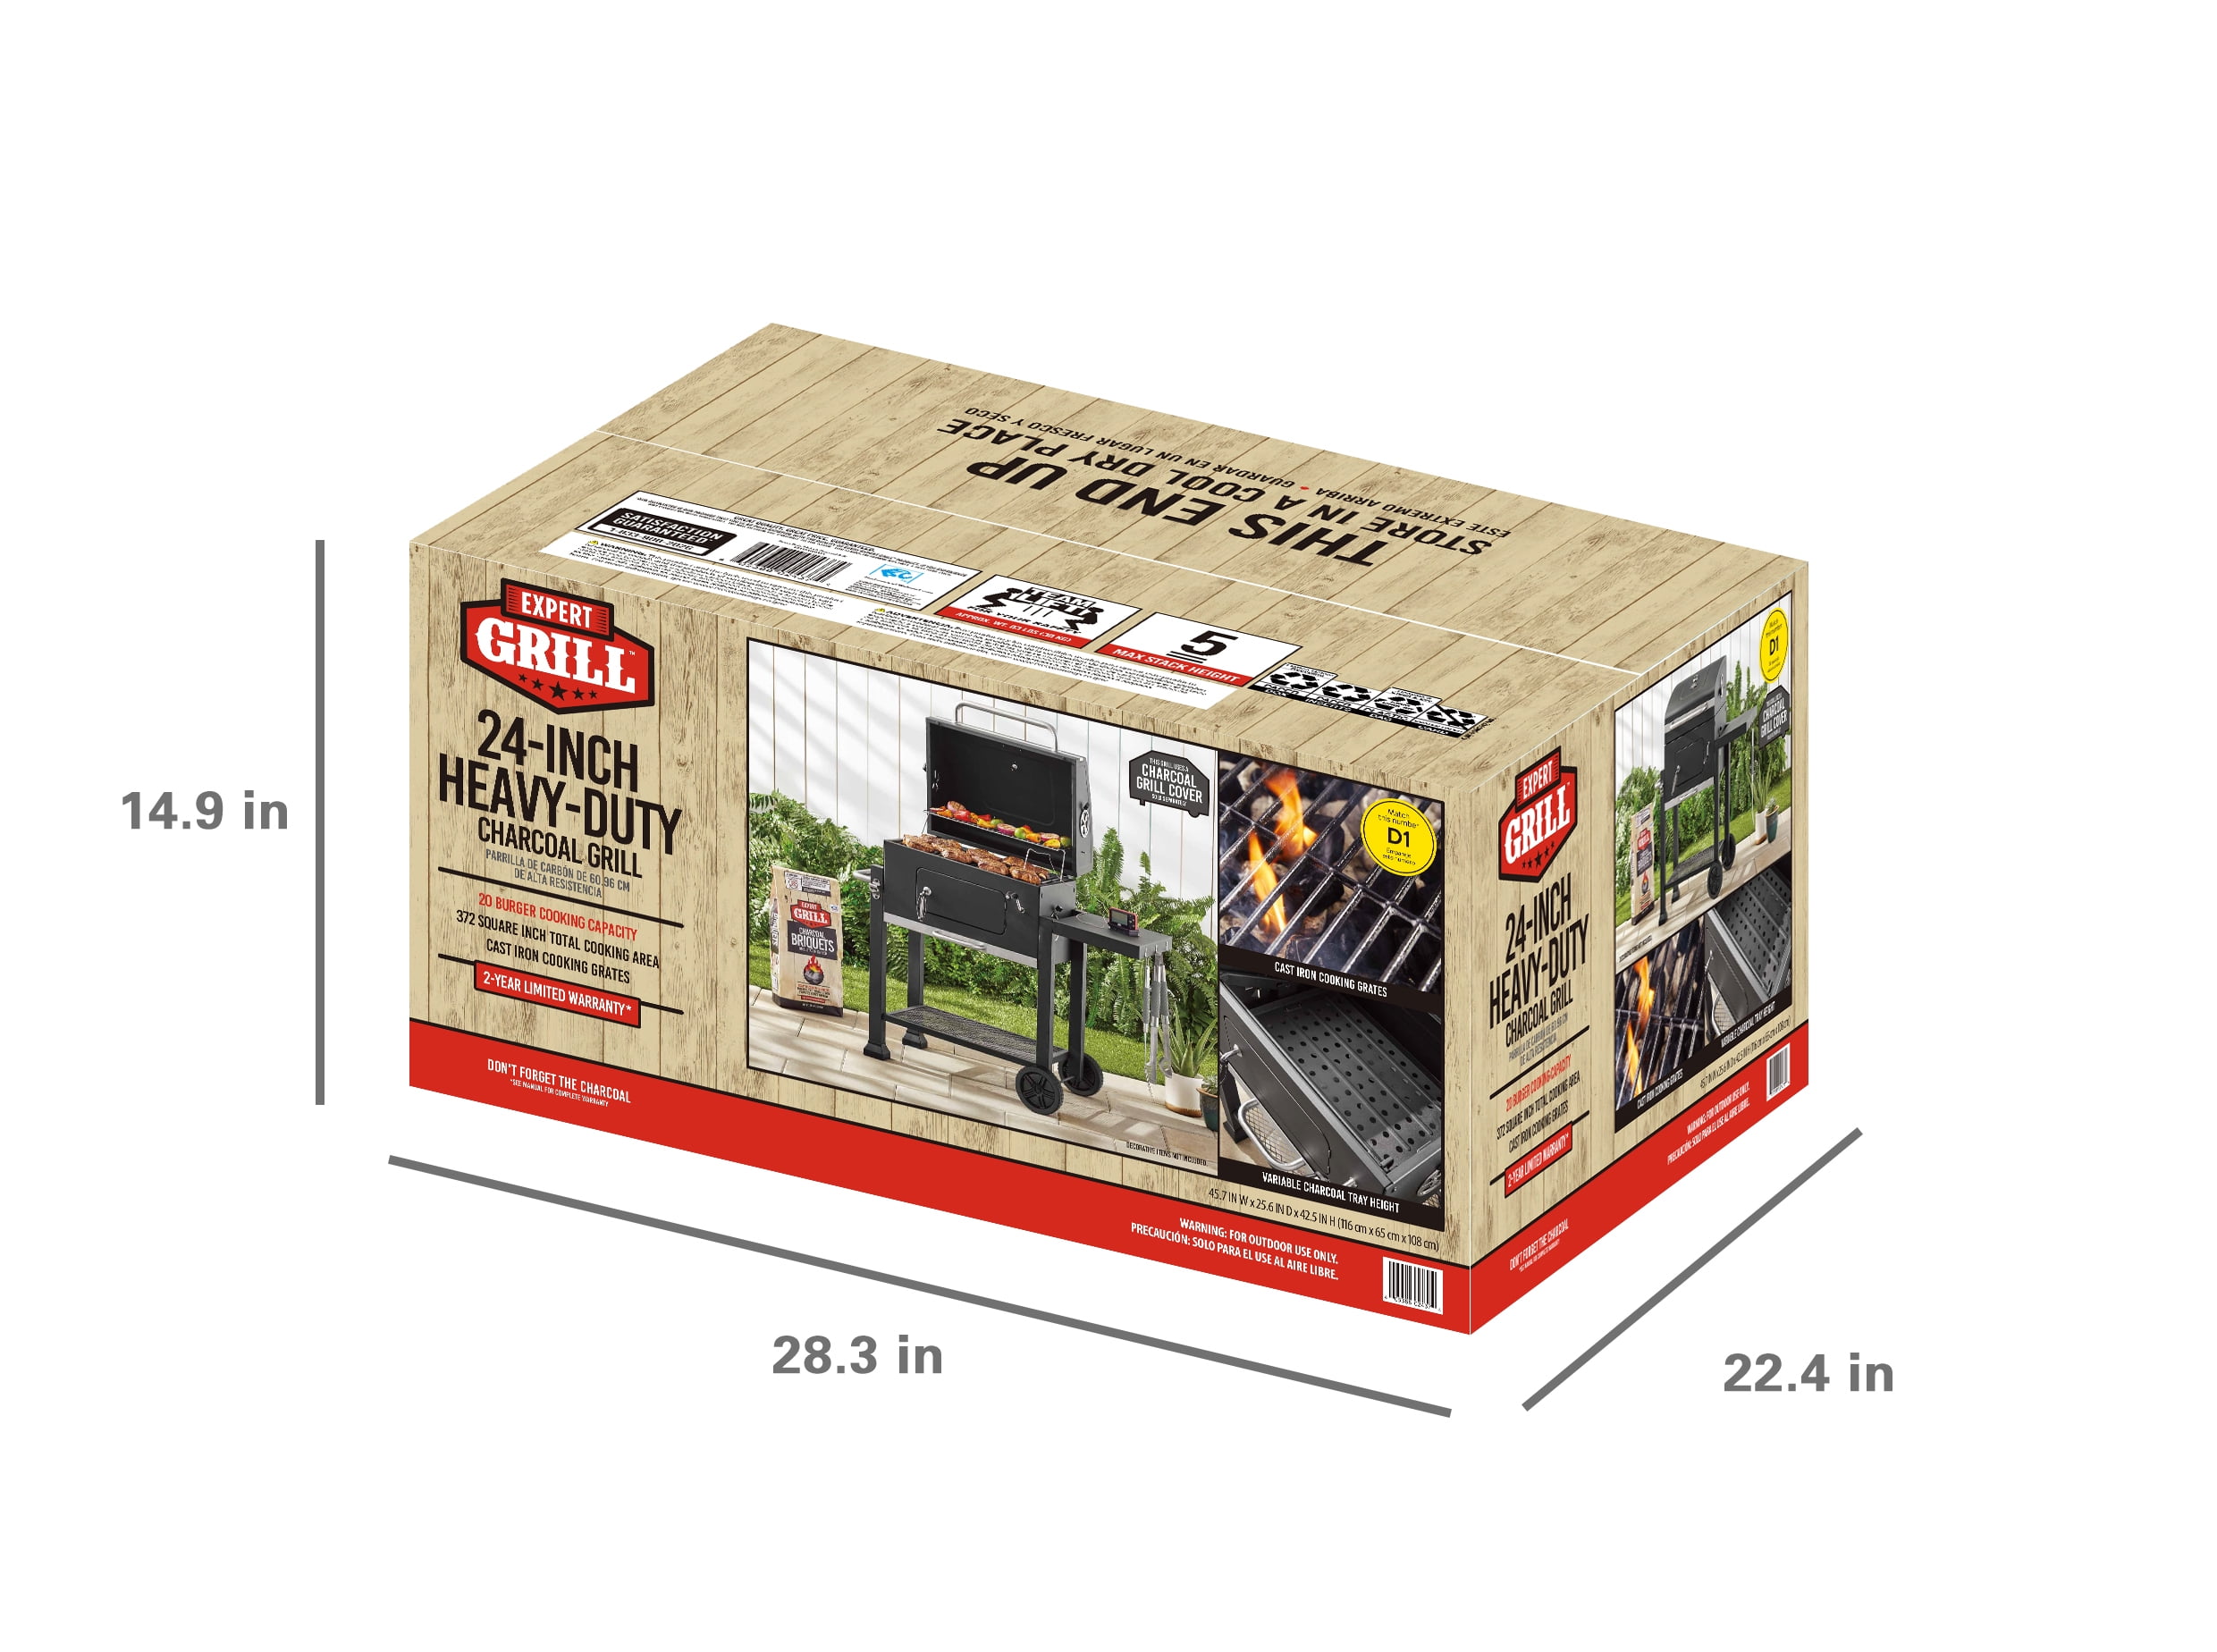 Expert Grill Heavy Duty 24-inch Charcoal Grill, Black 